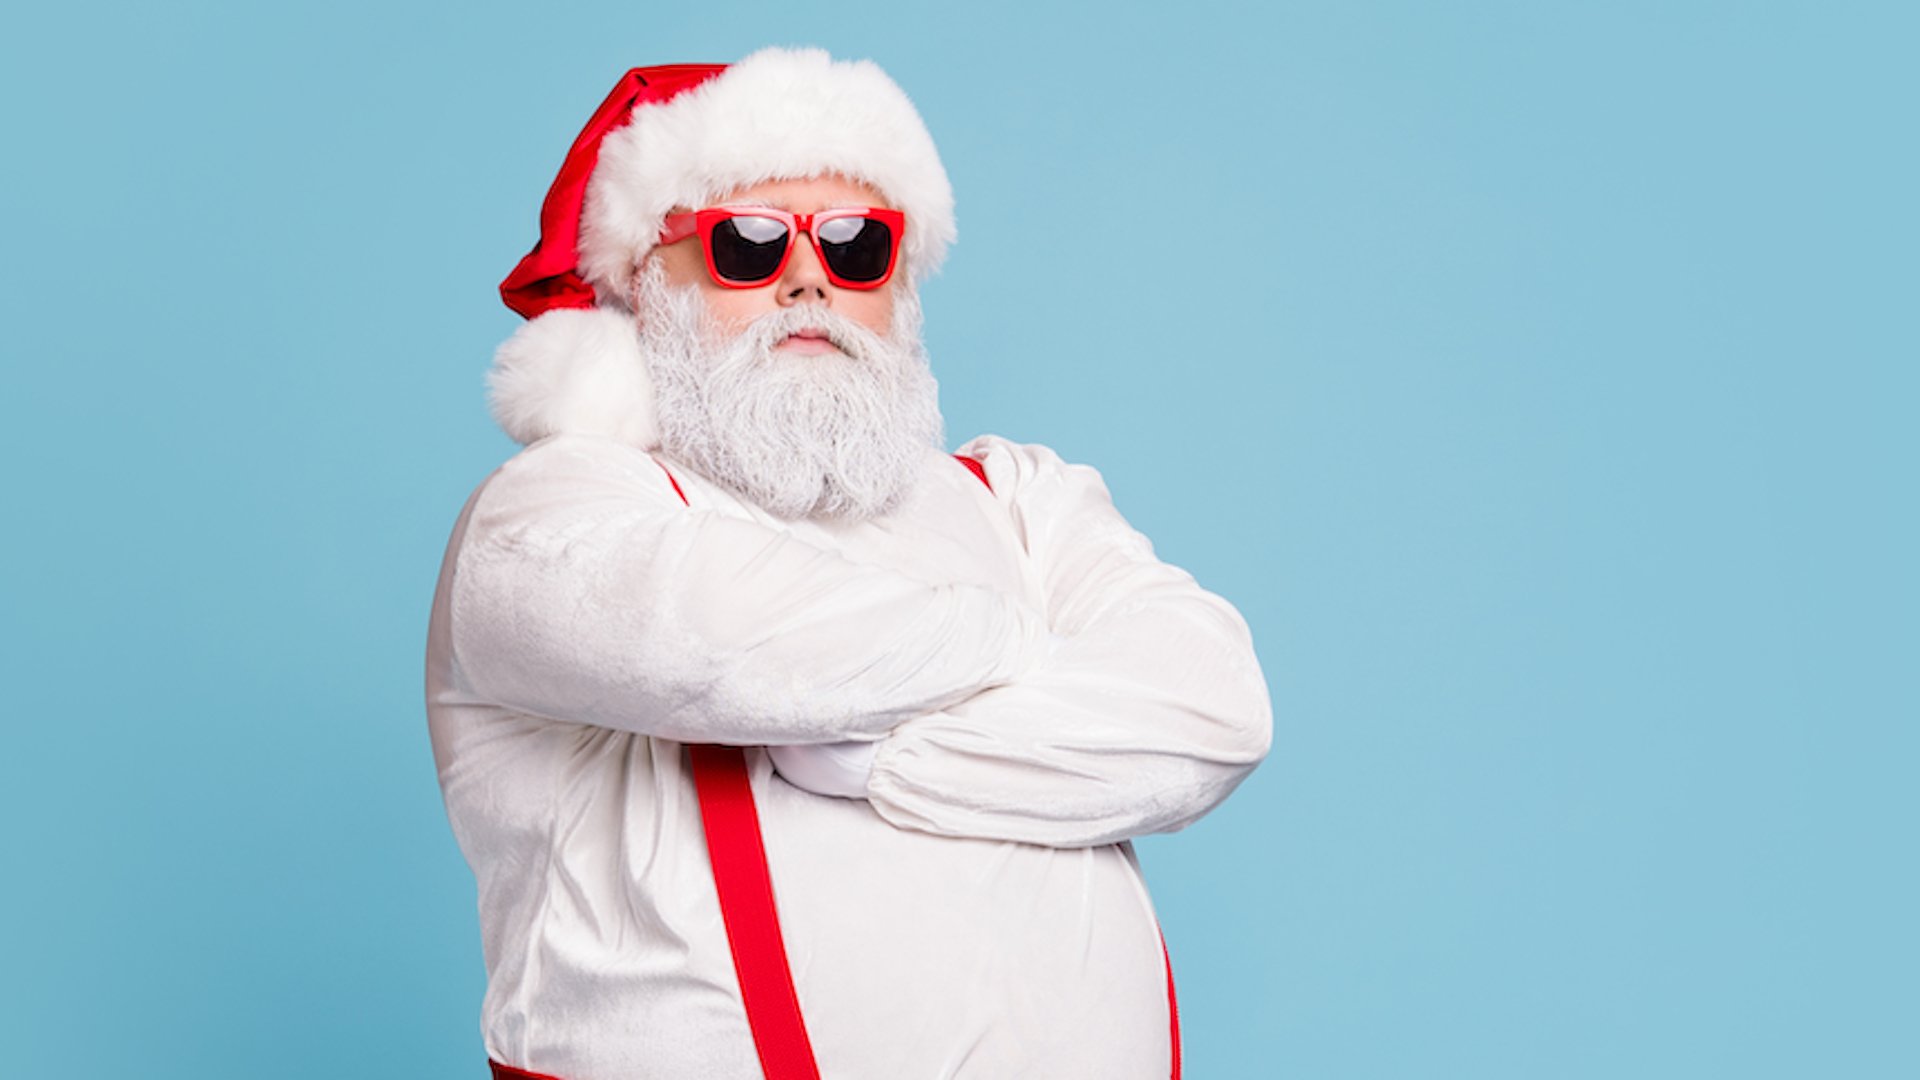 Santa Claus in red braces and sunglasses